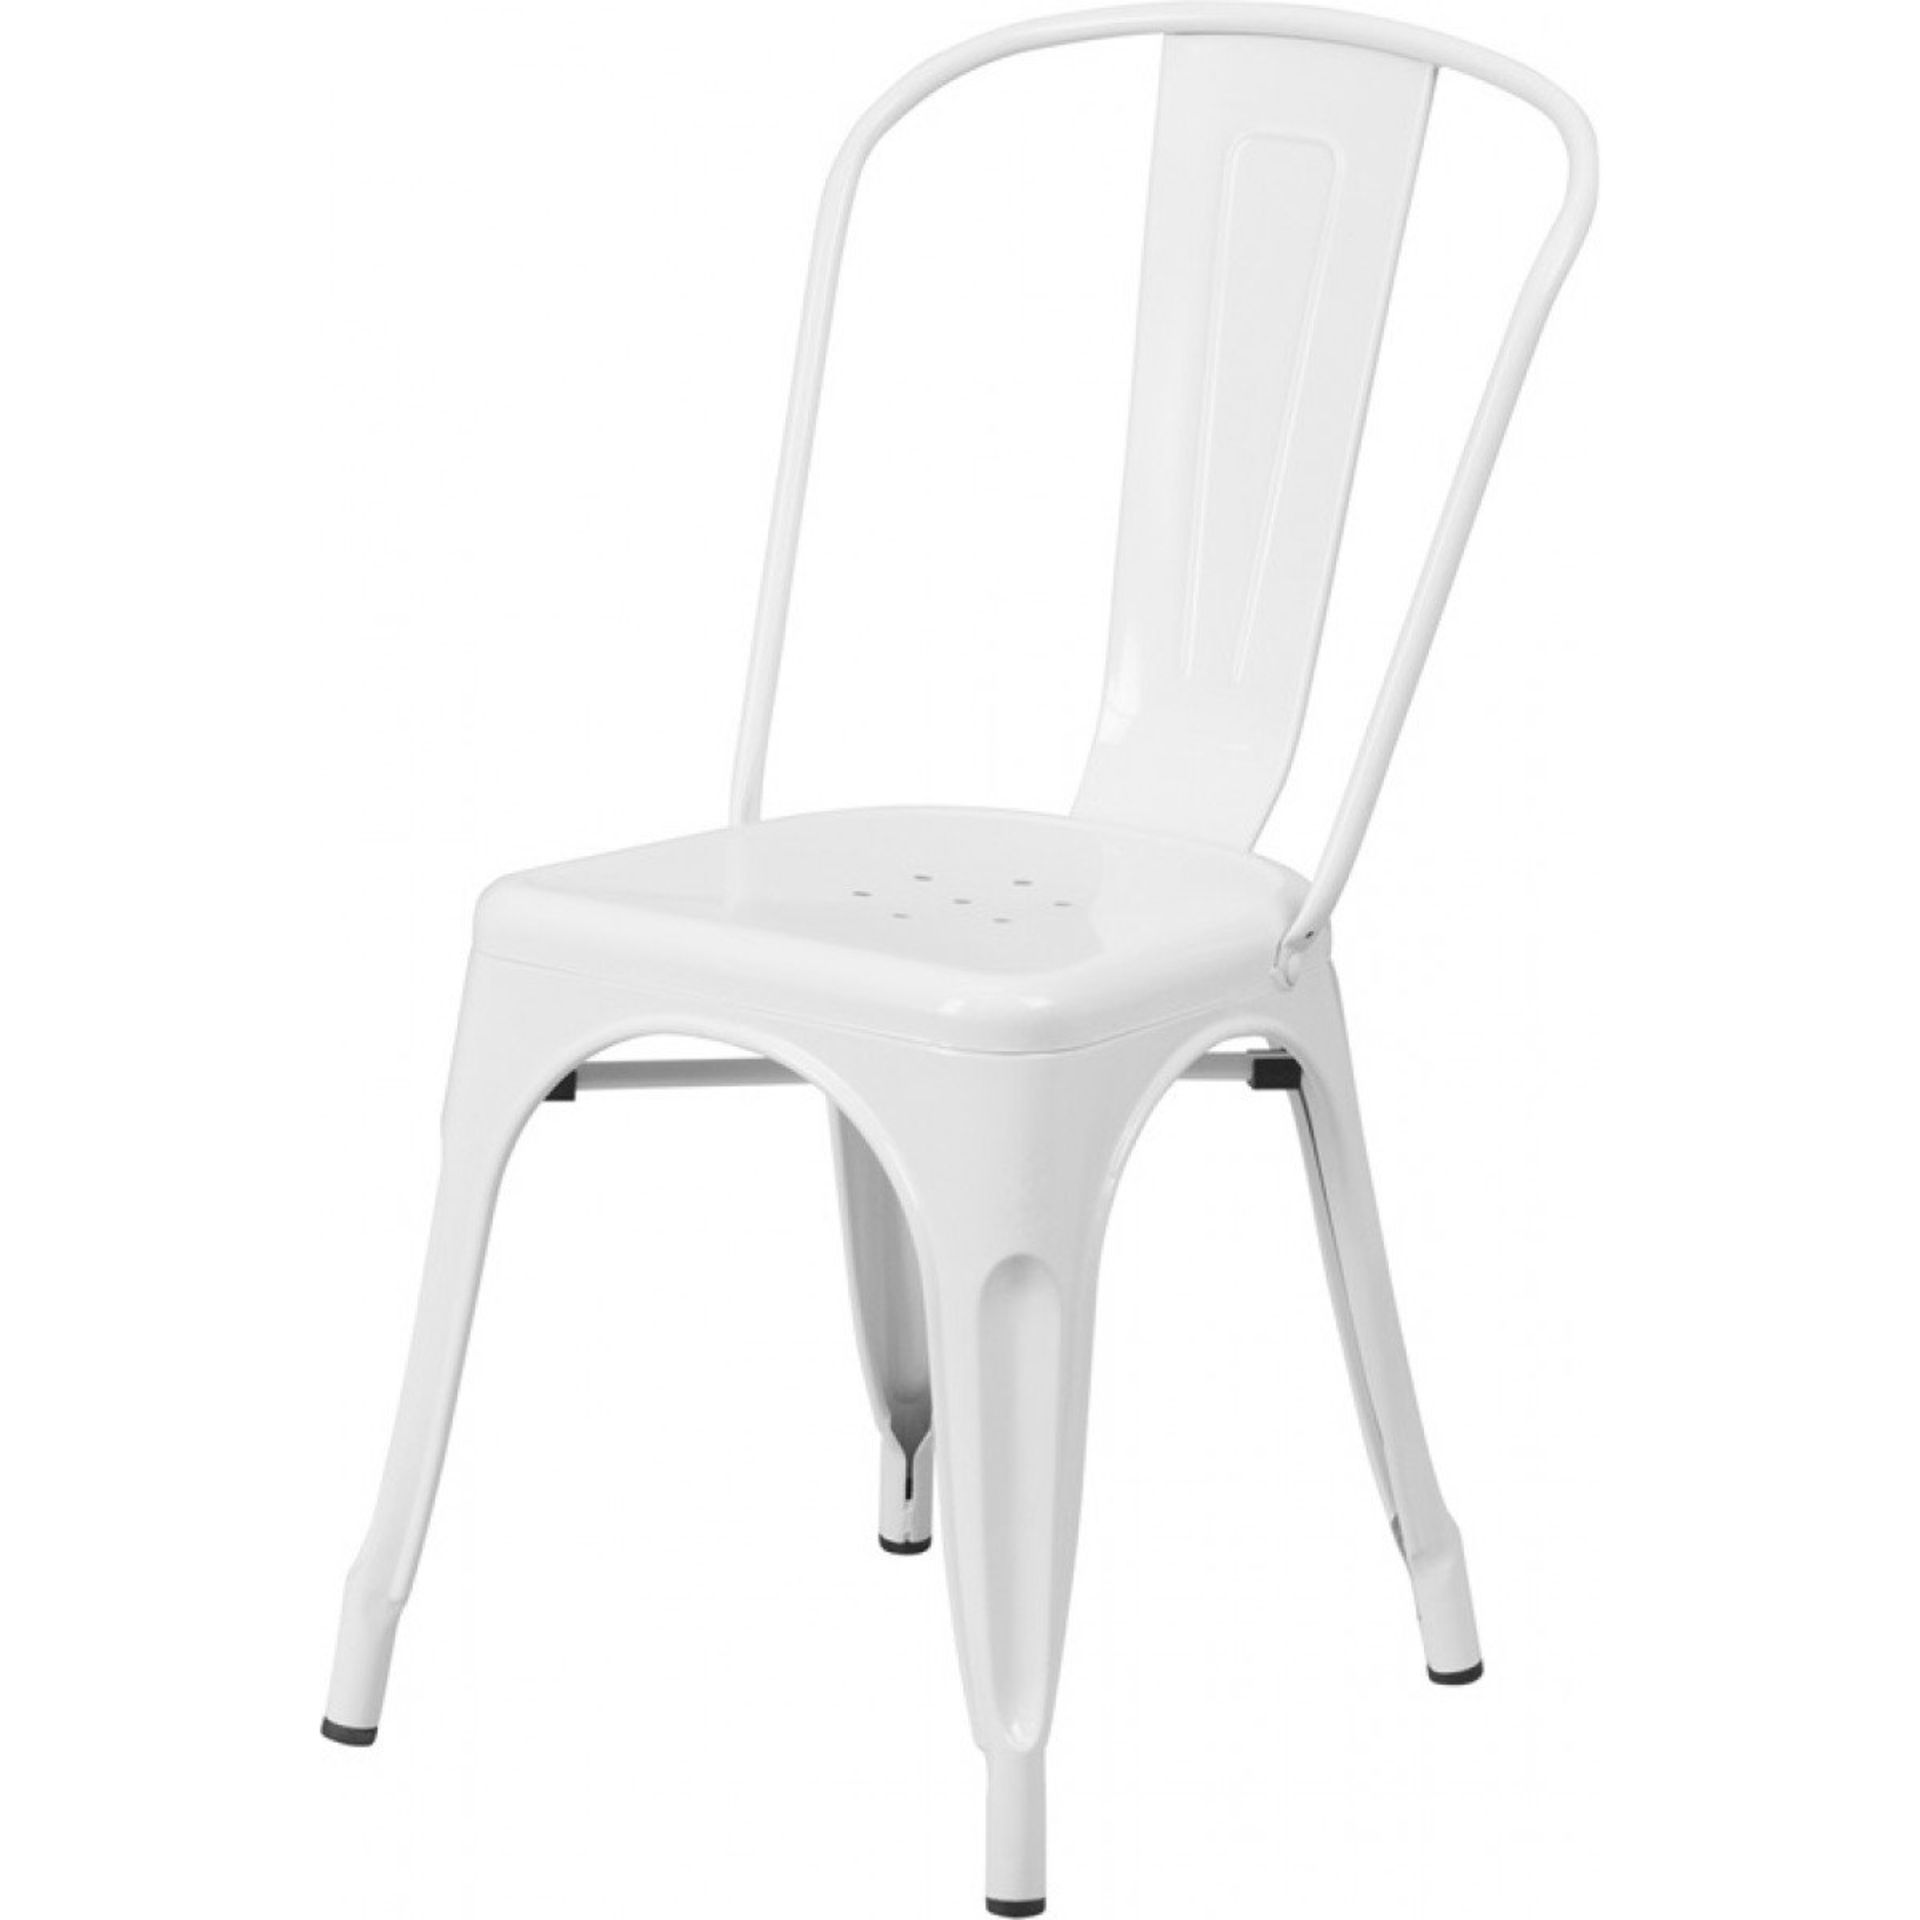 1 x Tolix Industrial Style Outdoor Bistro Table and Chair Set in White- Includes 1 x Table and 4 x - Image 11 of 14